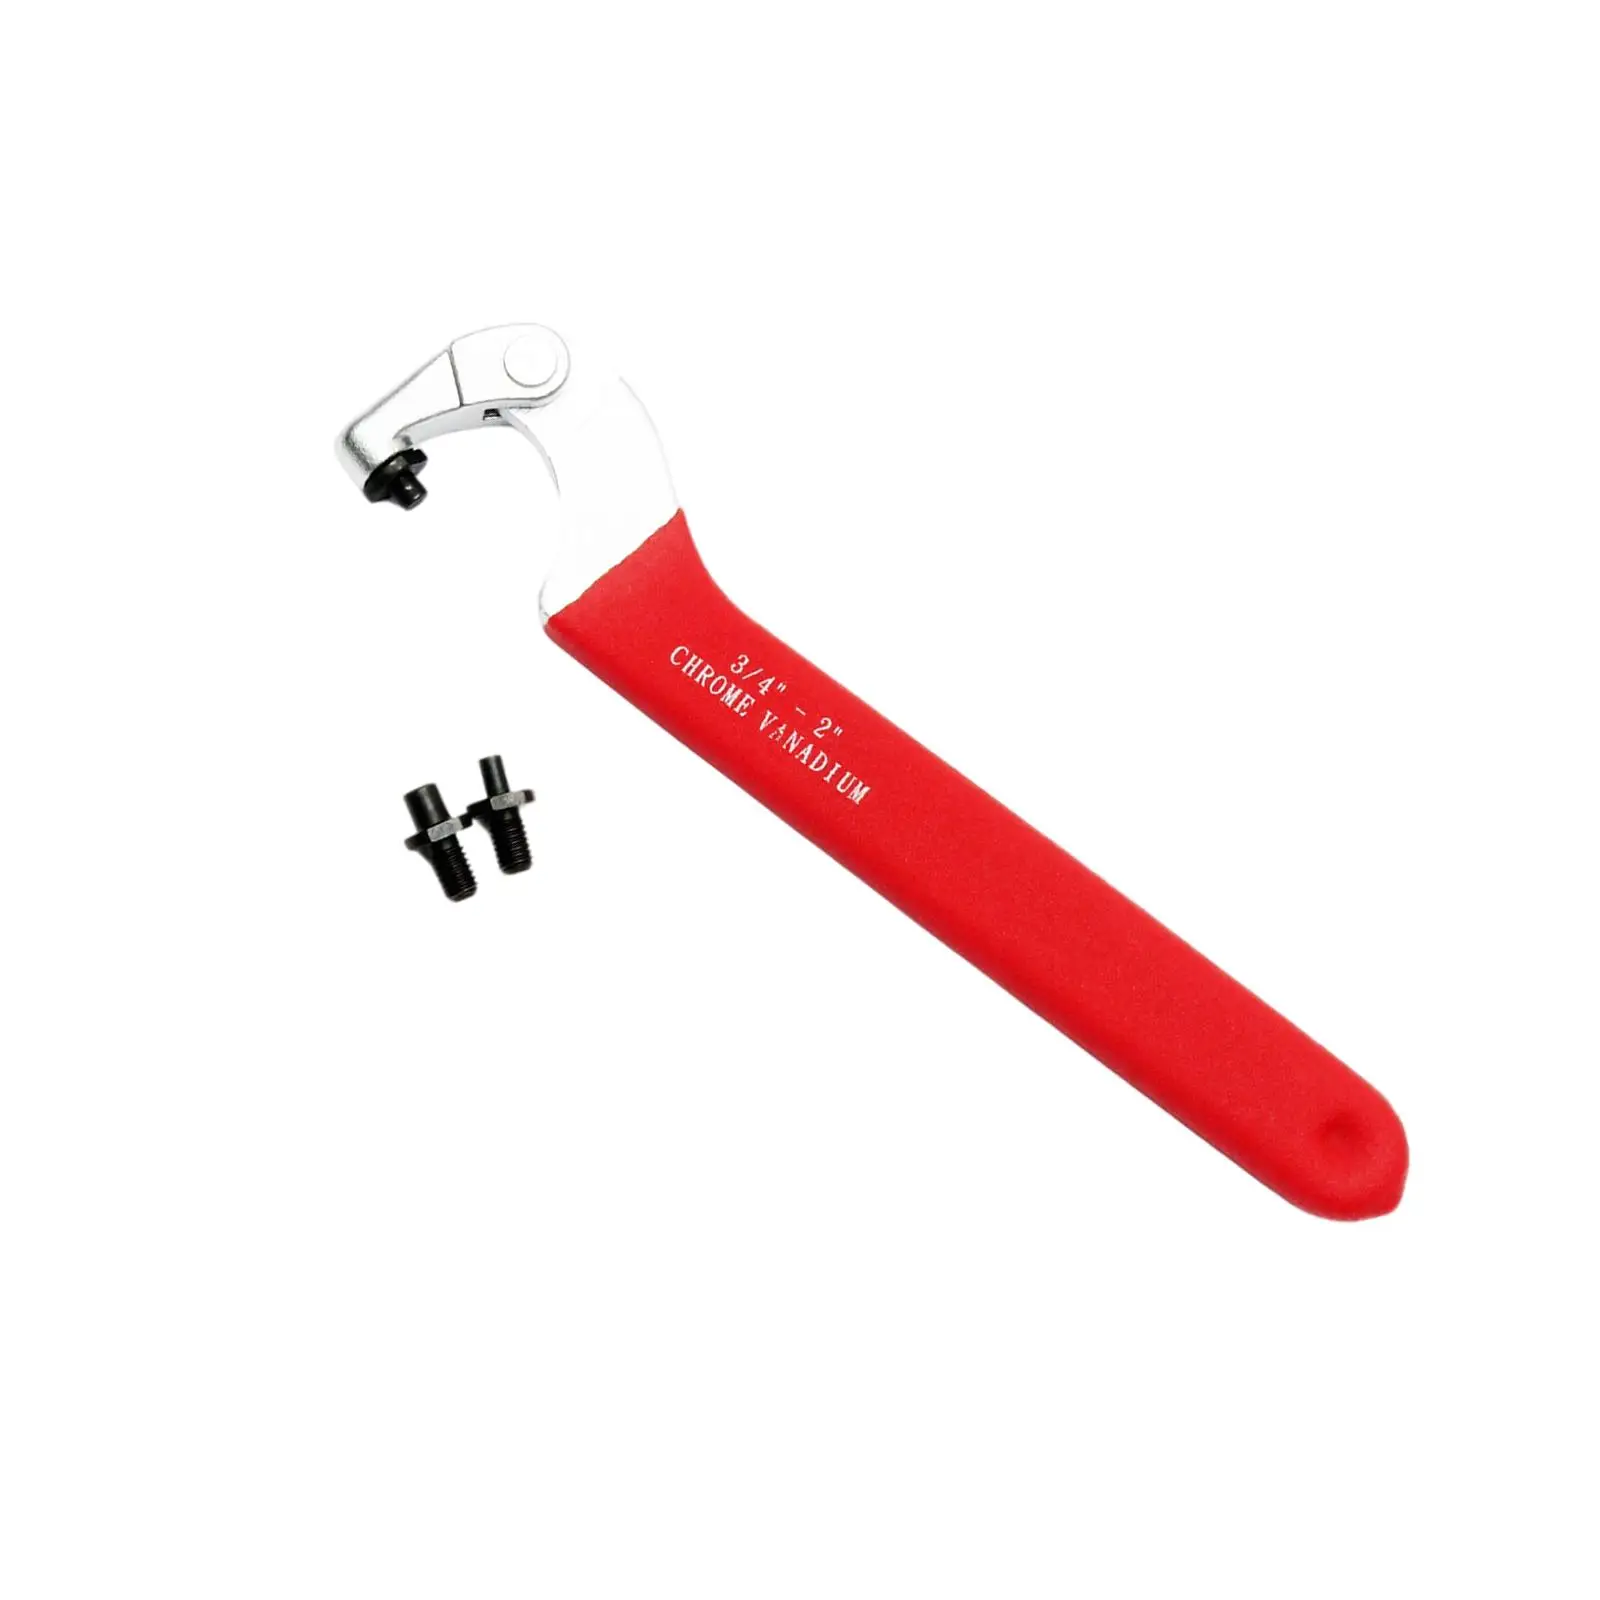 Adjustable Scuba Diving Spanner Wrench Small Pin Portable for Outdoor Accessories